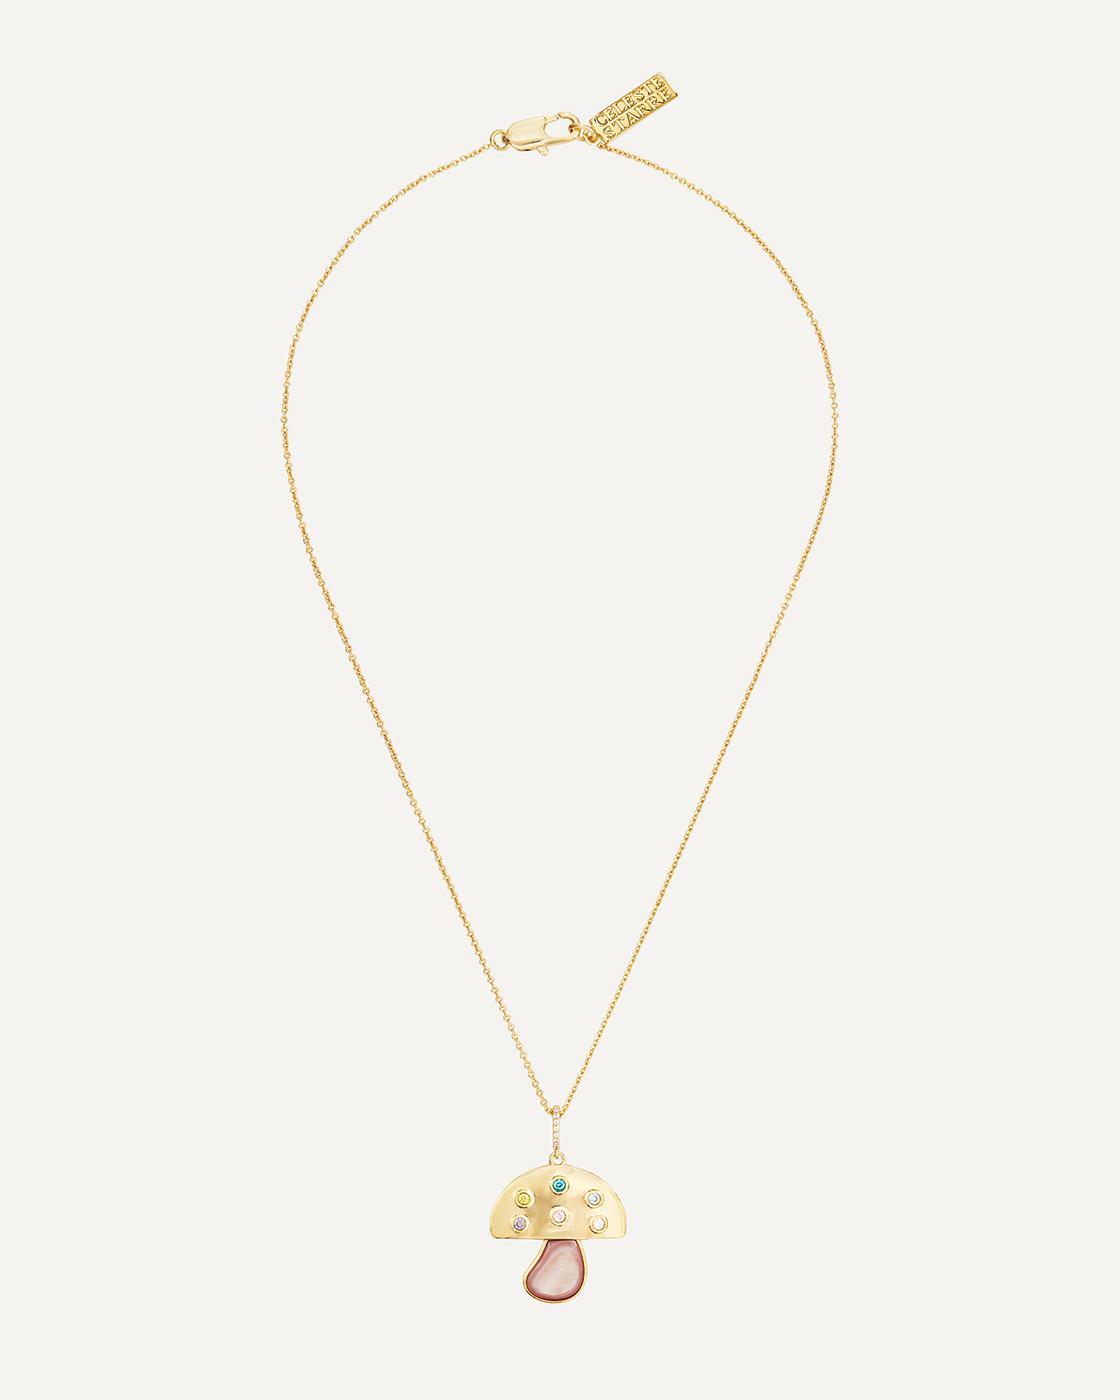 The Wonderland Gold-Plated Dainty Necklace with Pink Pearl Mushroom Charm